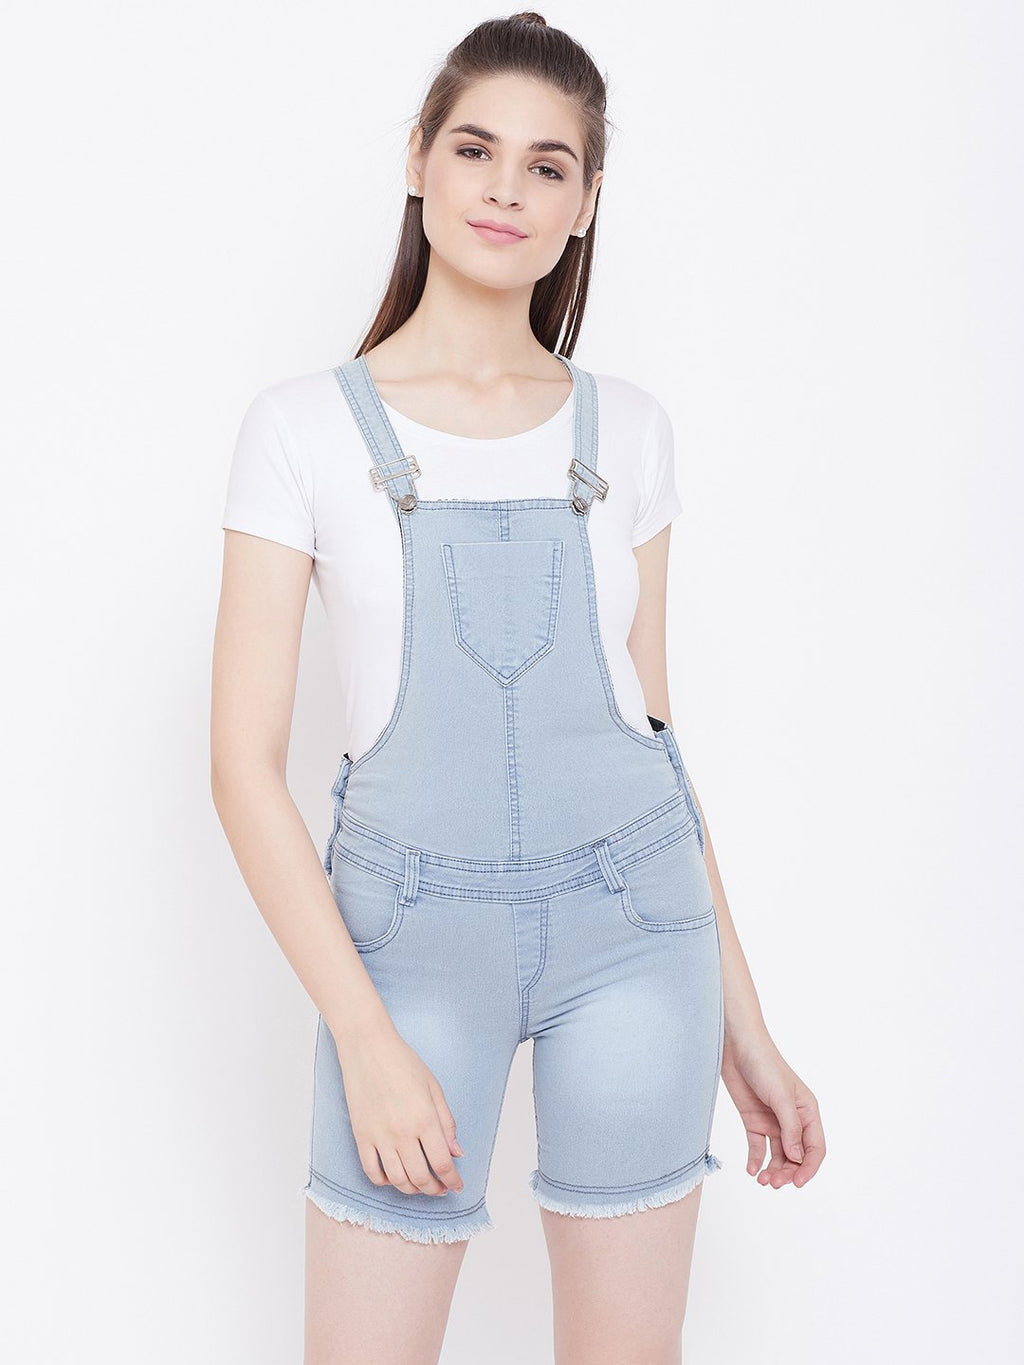 Stretchable Grey Shorts Dungarees - NiftyJeans